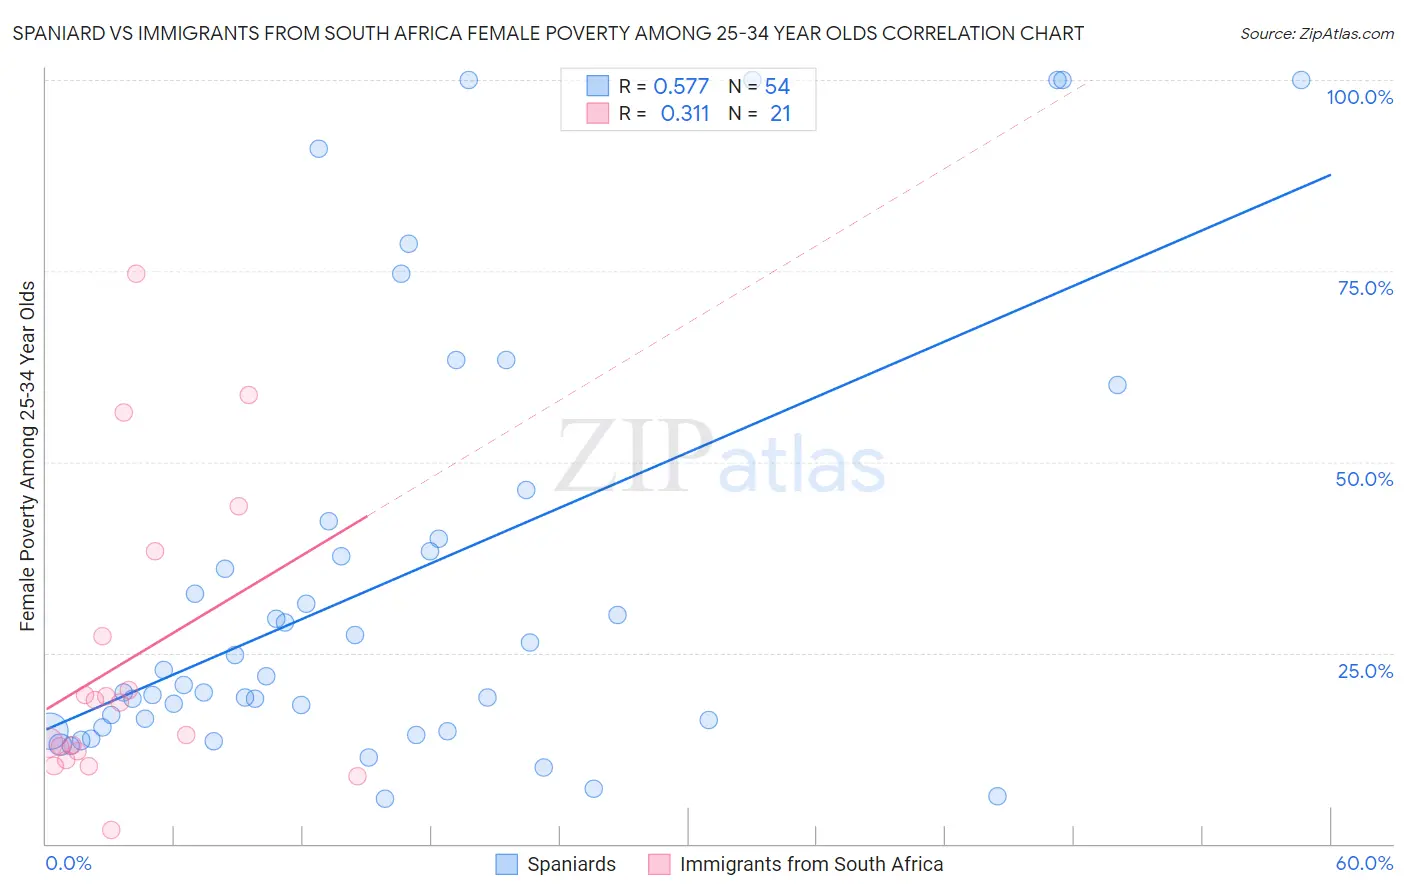 Spaniard vs Immigrants from South Africa Female Poverty Among 25-34 Year Olds